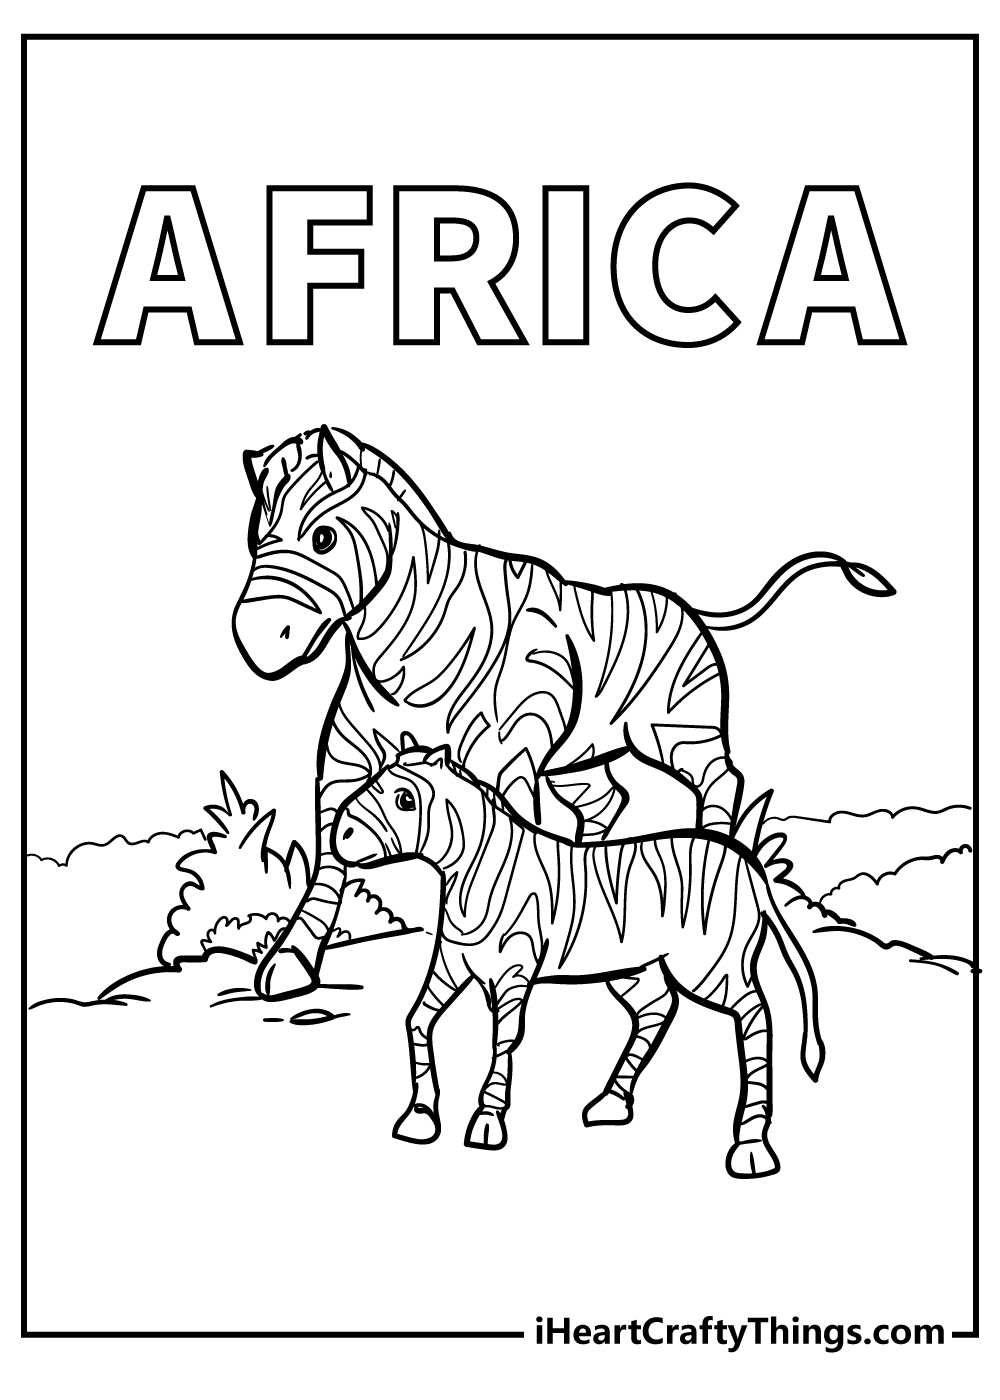 Africa Coloring Book free printable